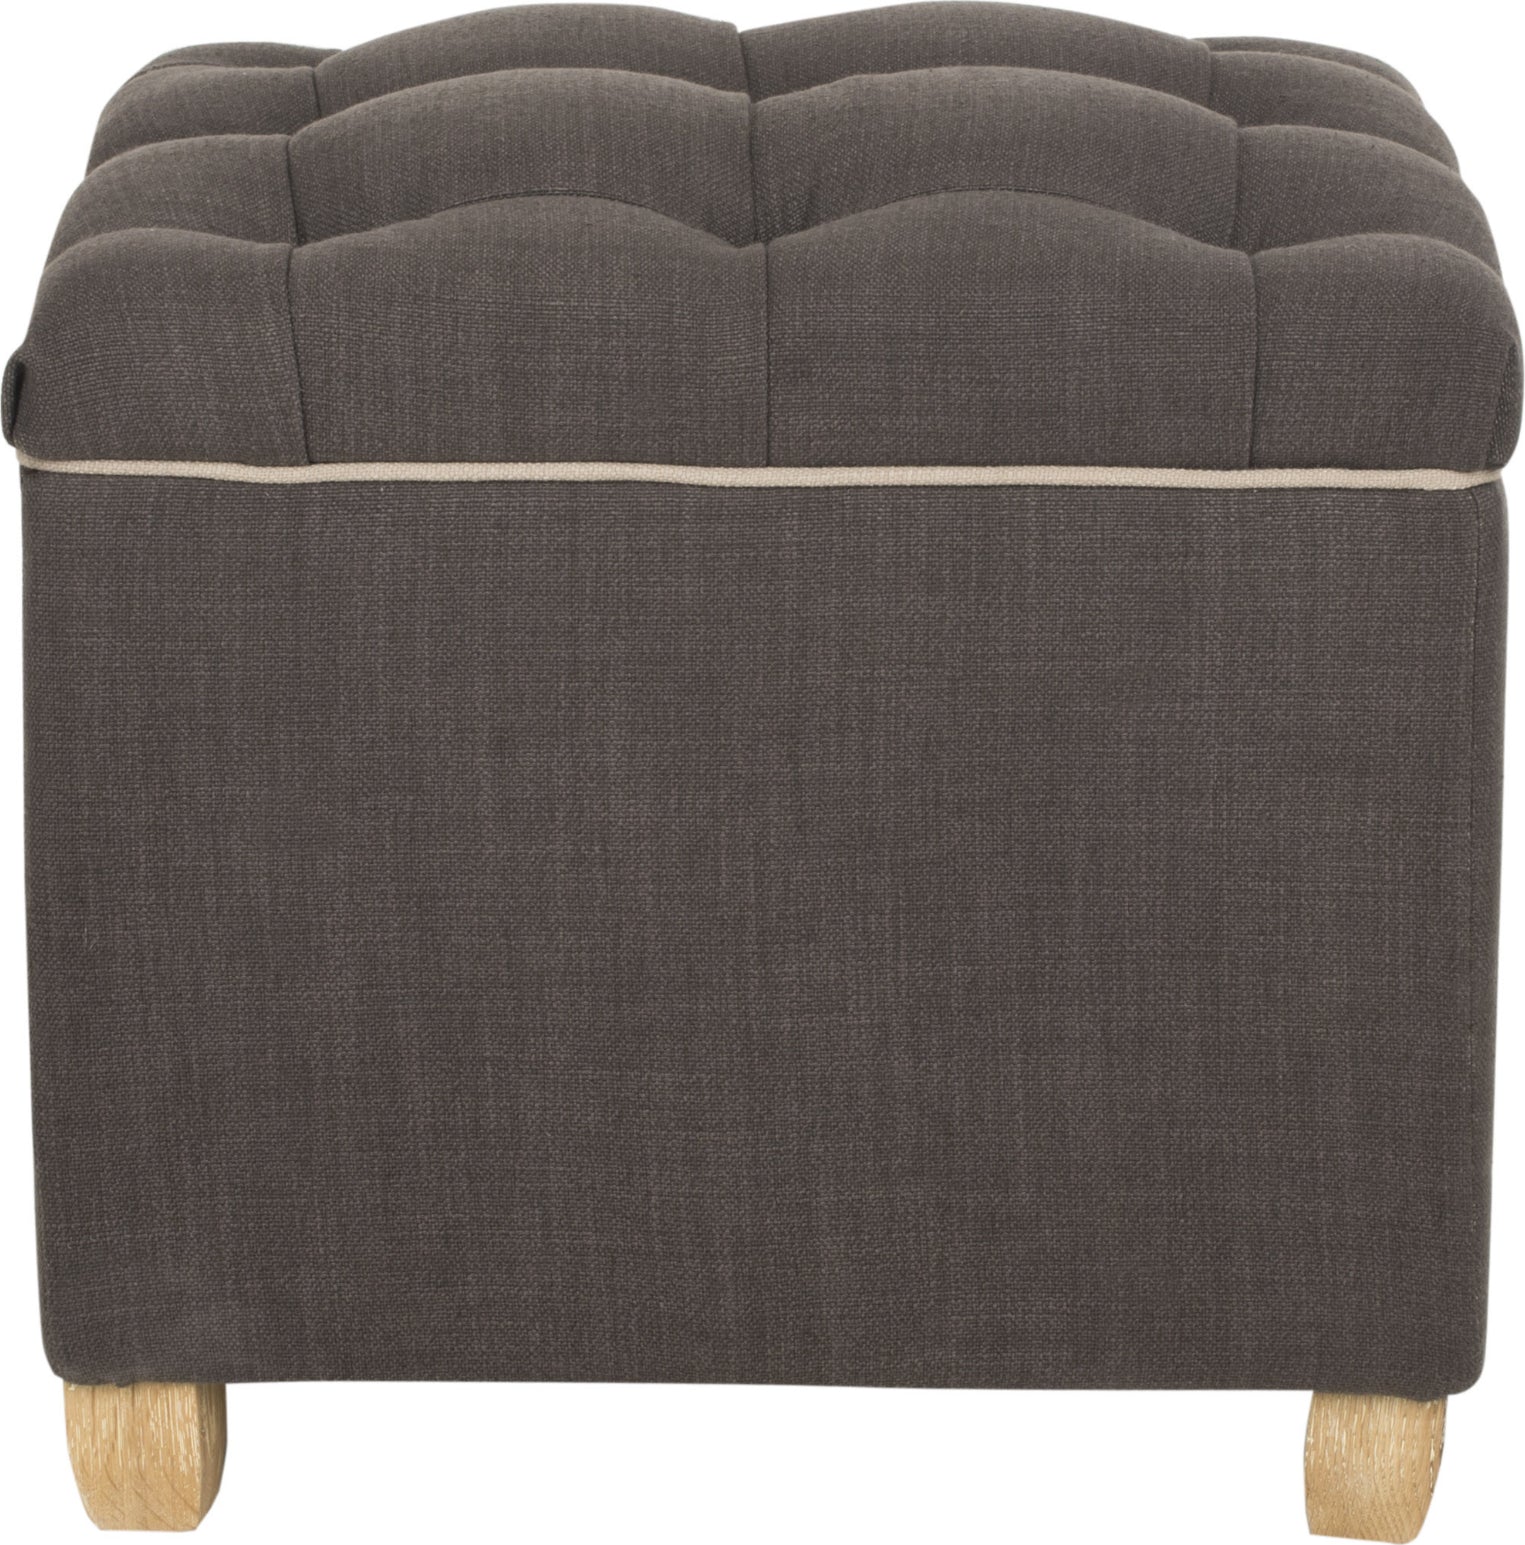 Safavieh Joanie Tufted Ottoman Charcoal Brown and Pickled Oak Furniture main image